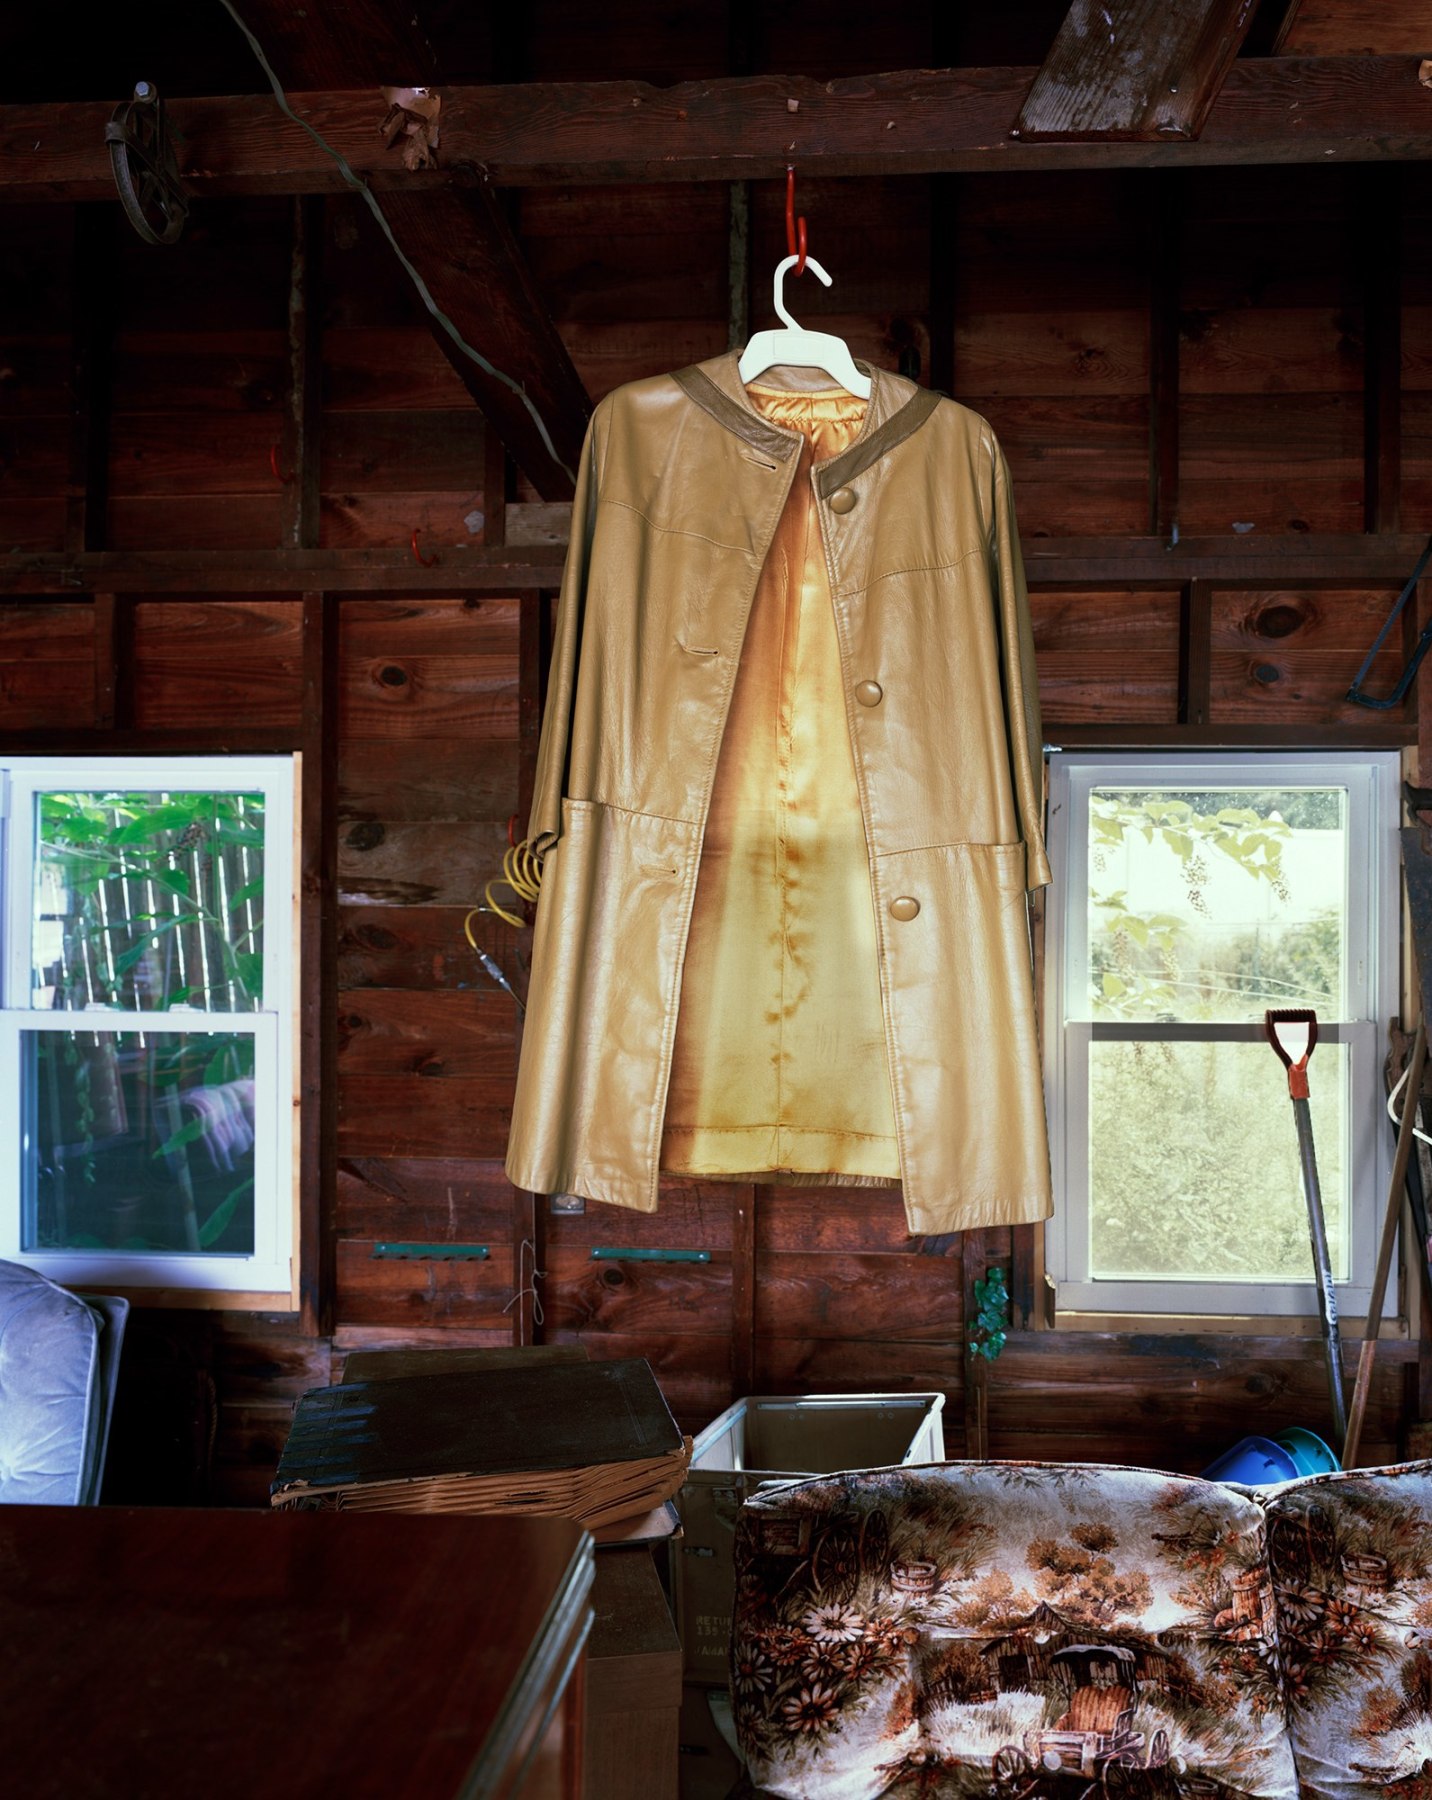 Photograph of leather jacker hanging from rafter in cabin, by Jade Doskow